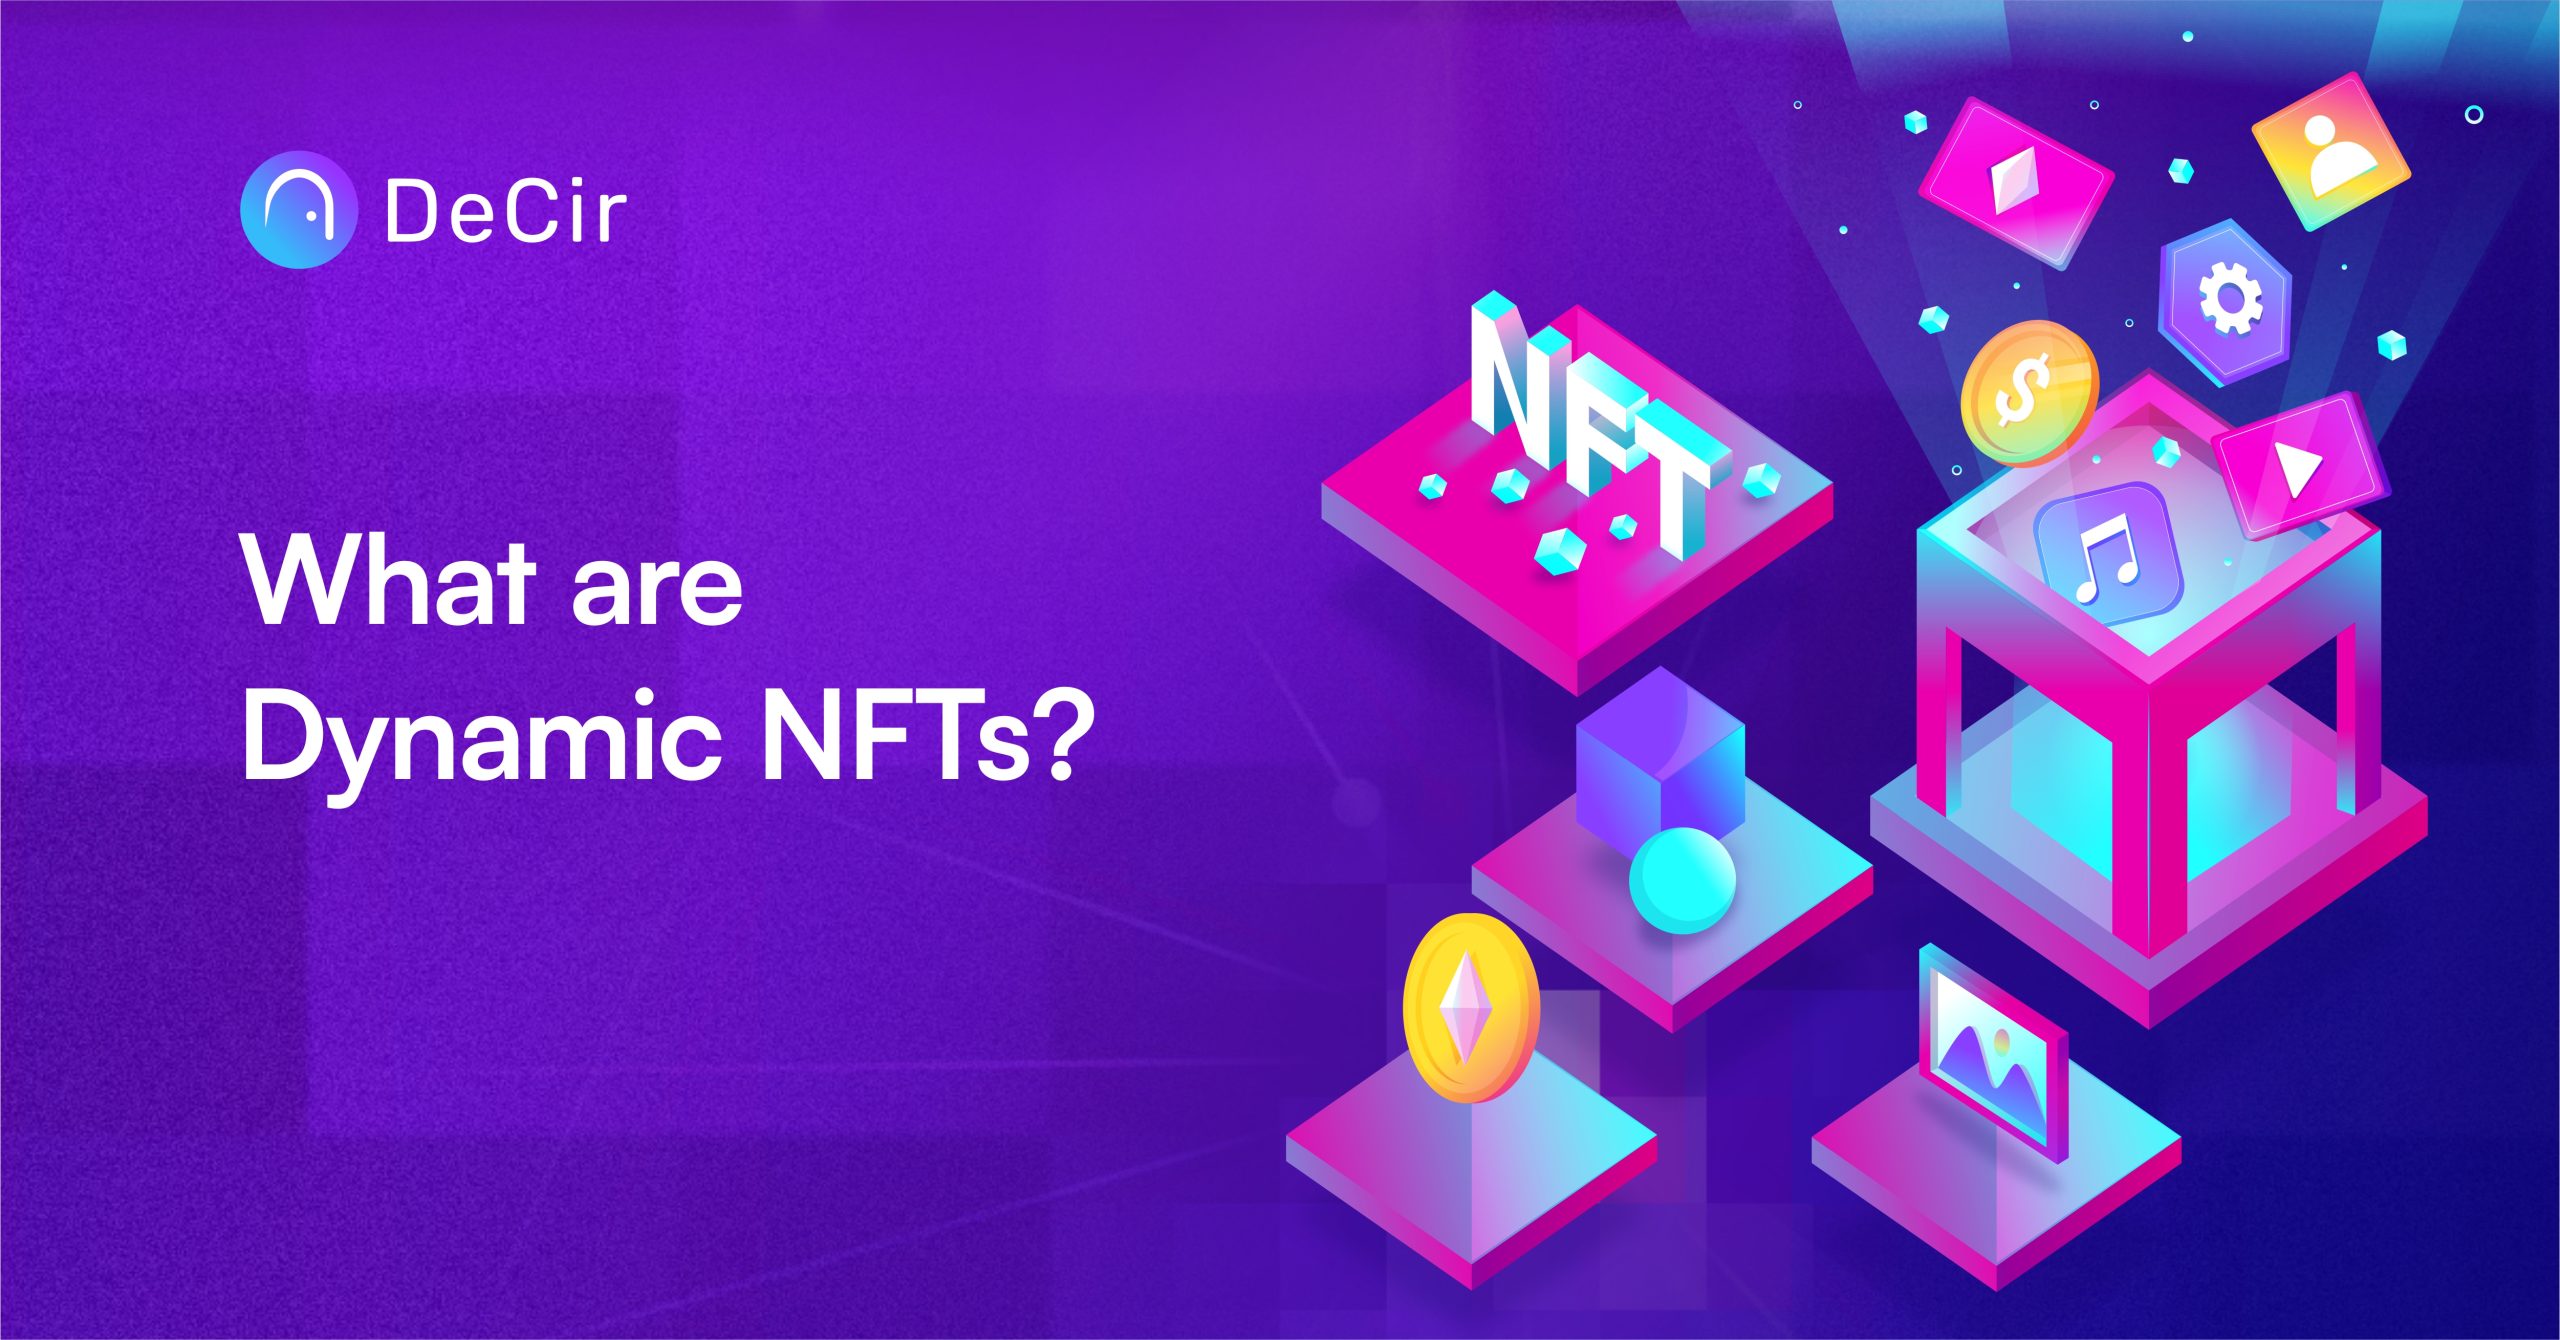 What are Dynamic NFTs?